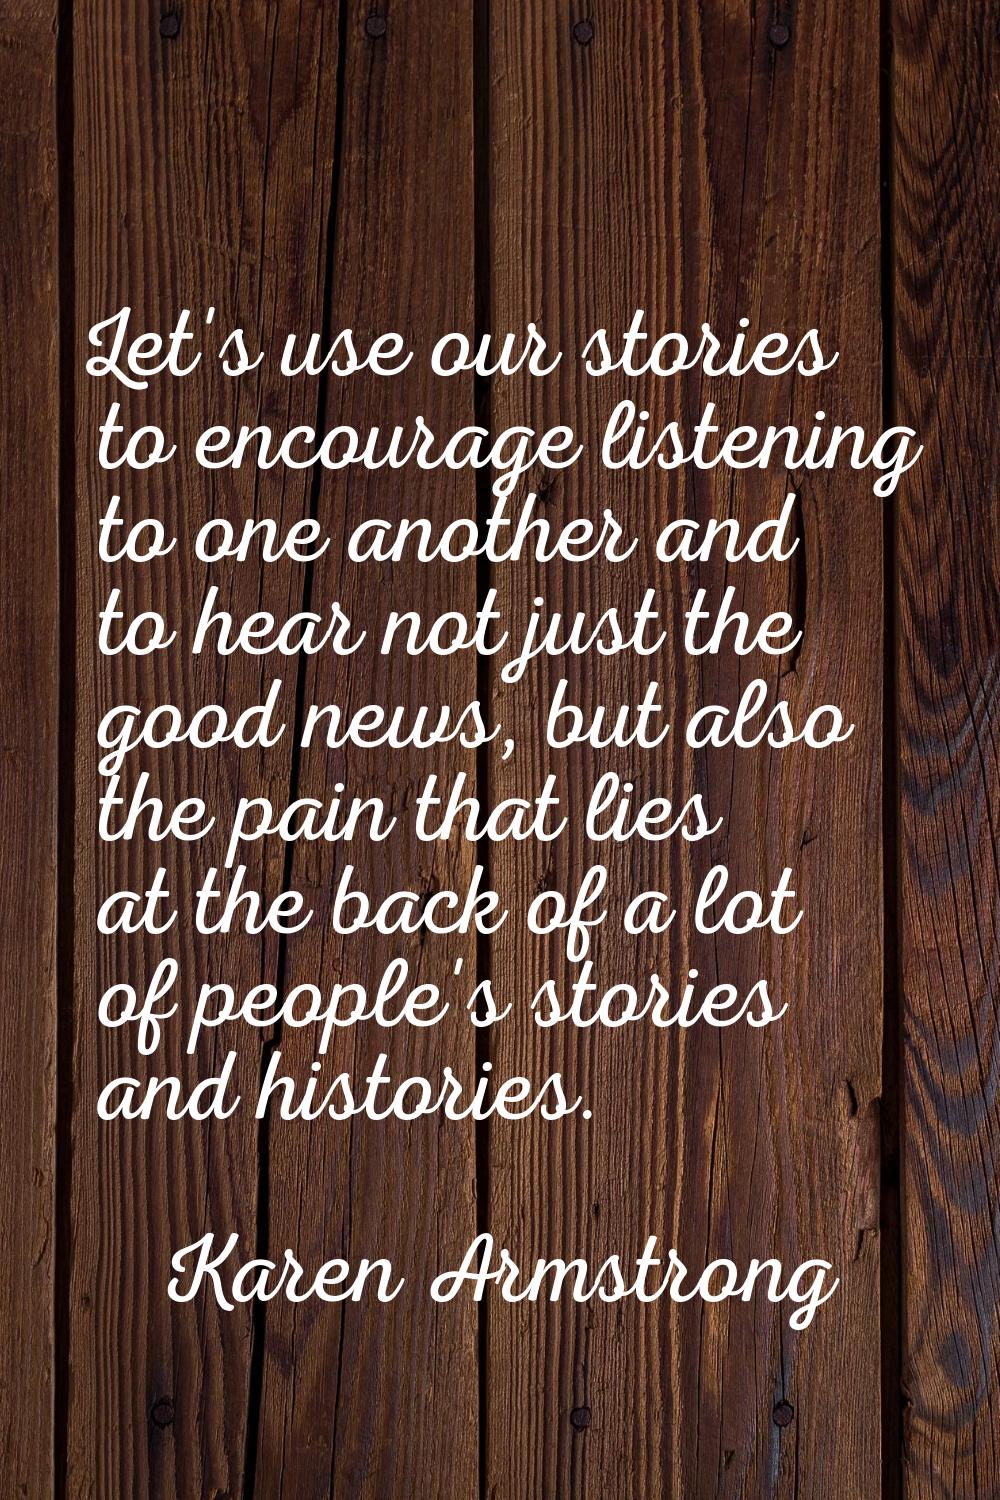 Let's use our stories to encourage listening to one another and to hear not just the good news, but